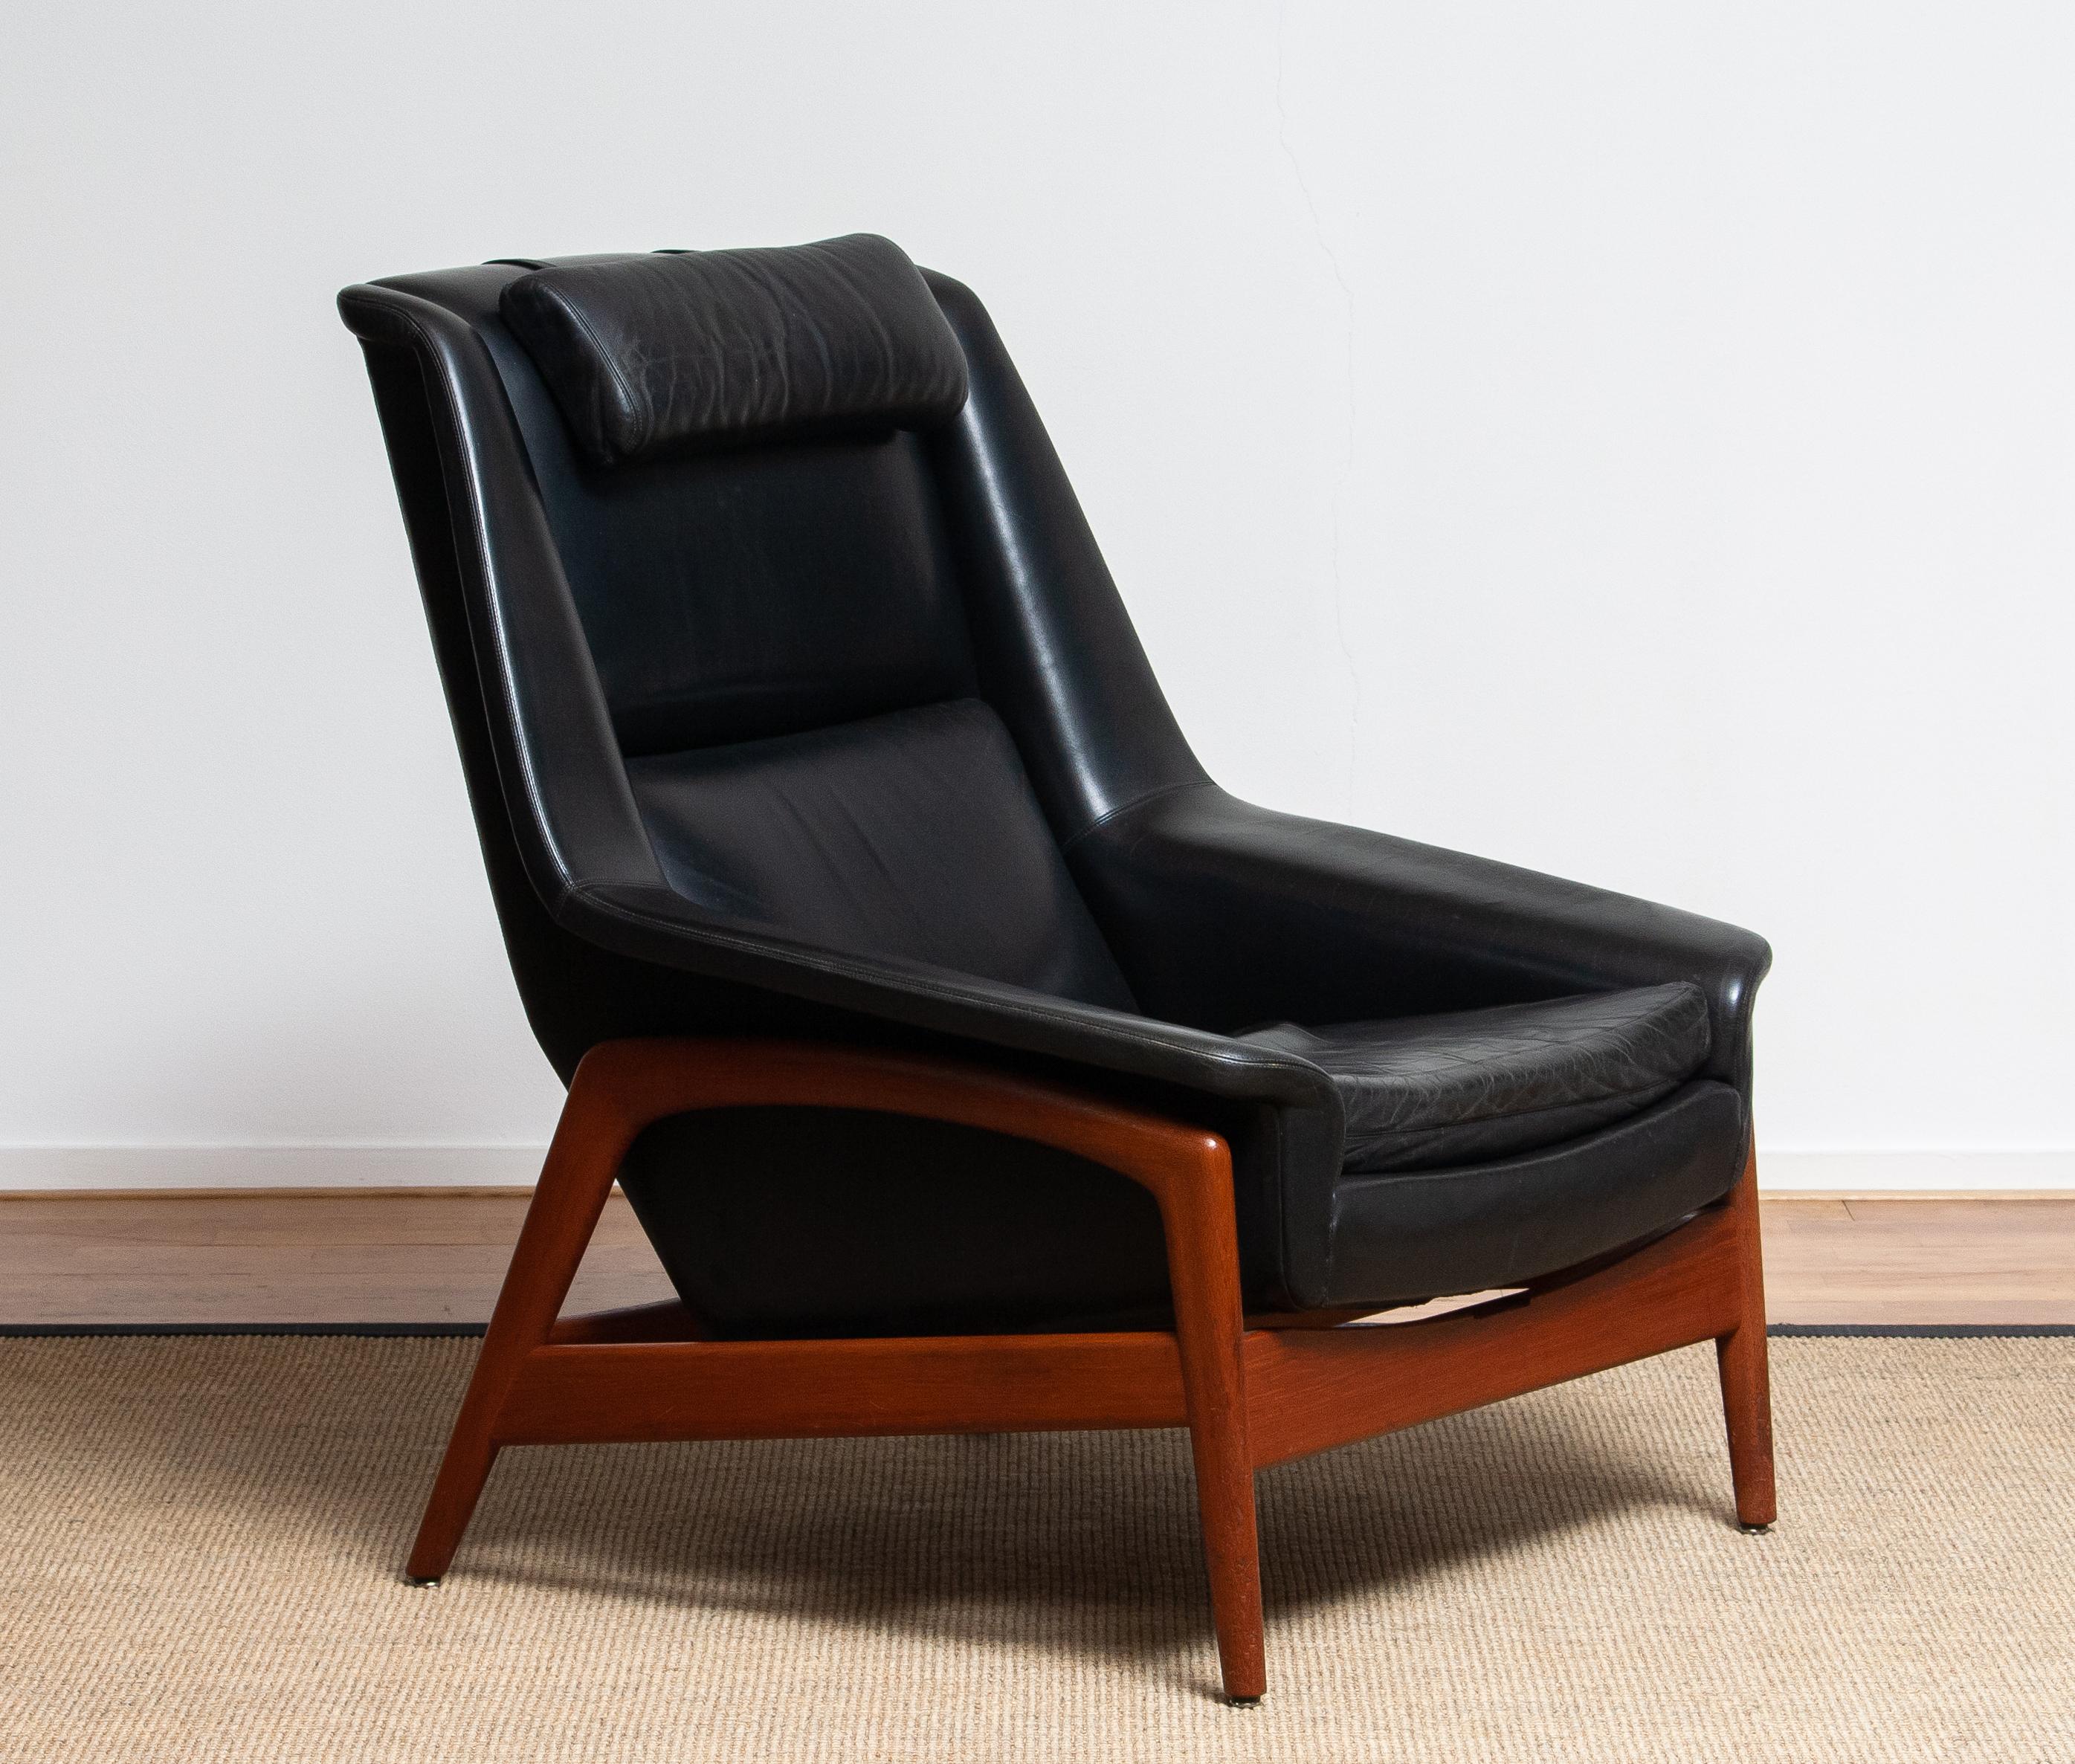 1960s Pair of Lounge Chairs 'Profil', Folke Ohlsson for DUX in Leather and Teak 2